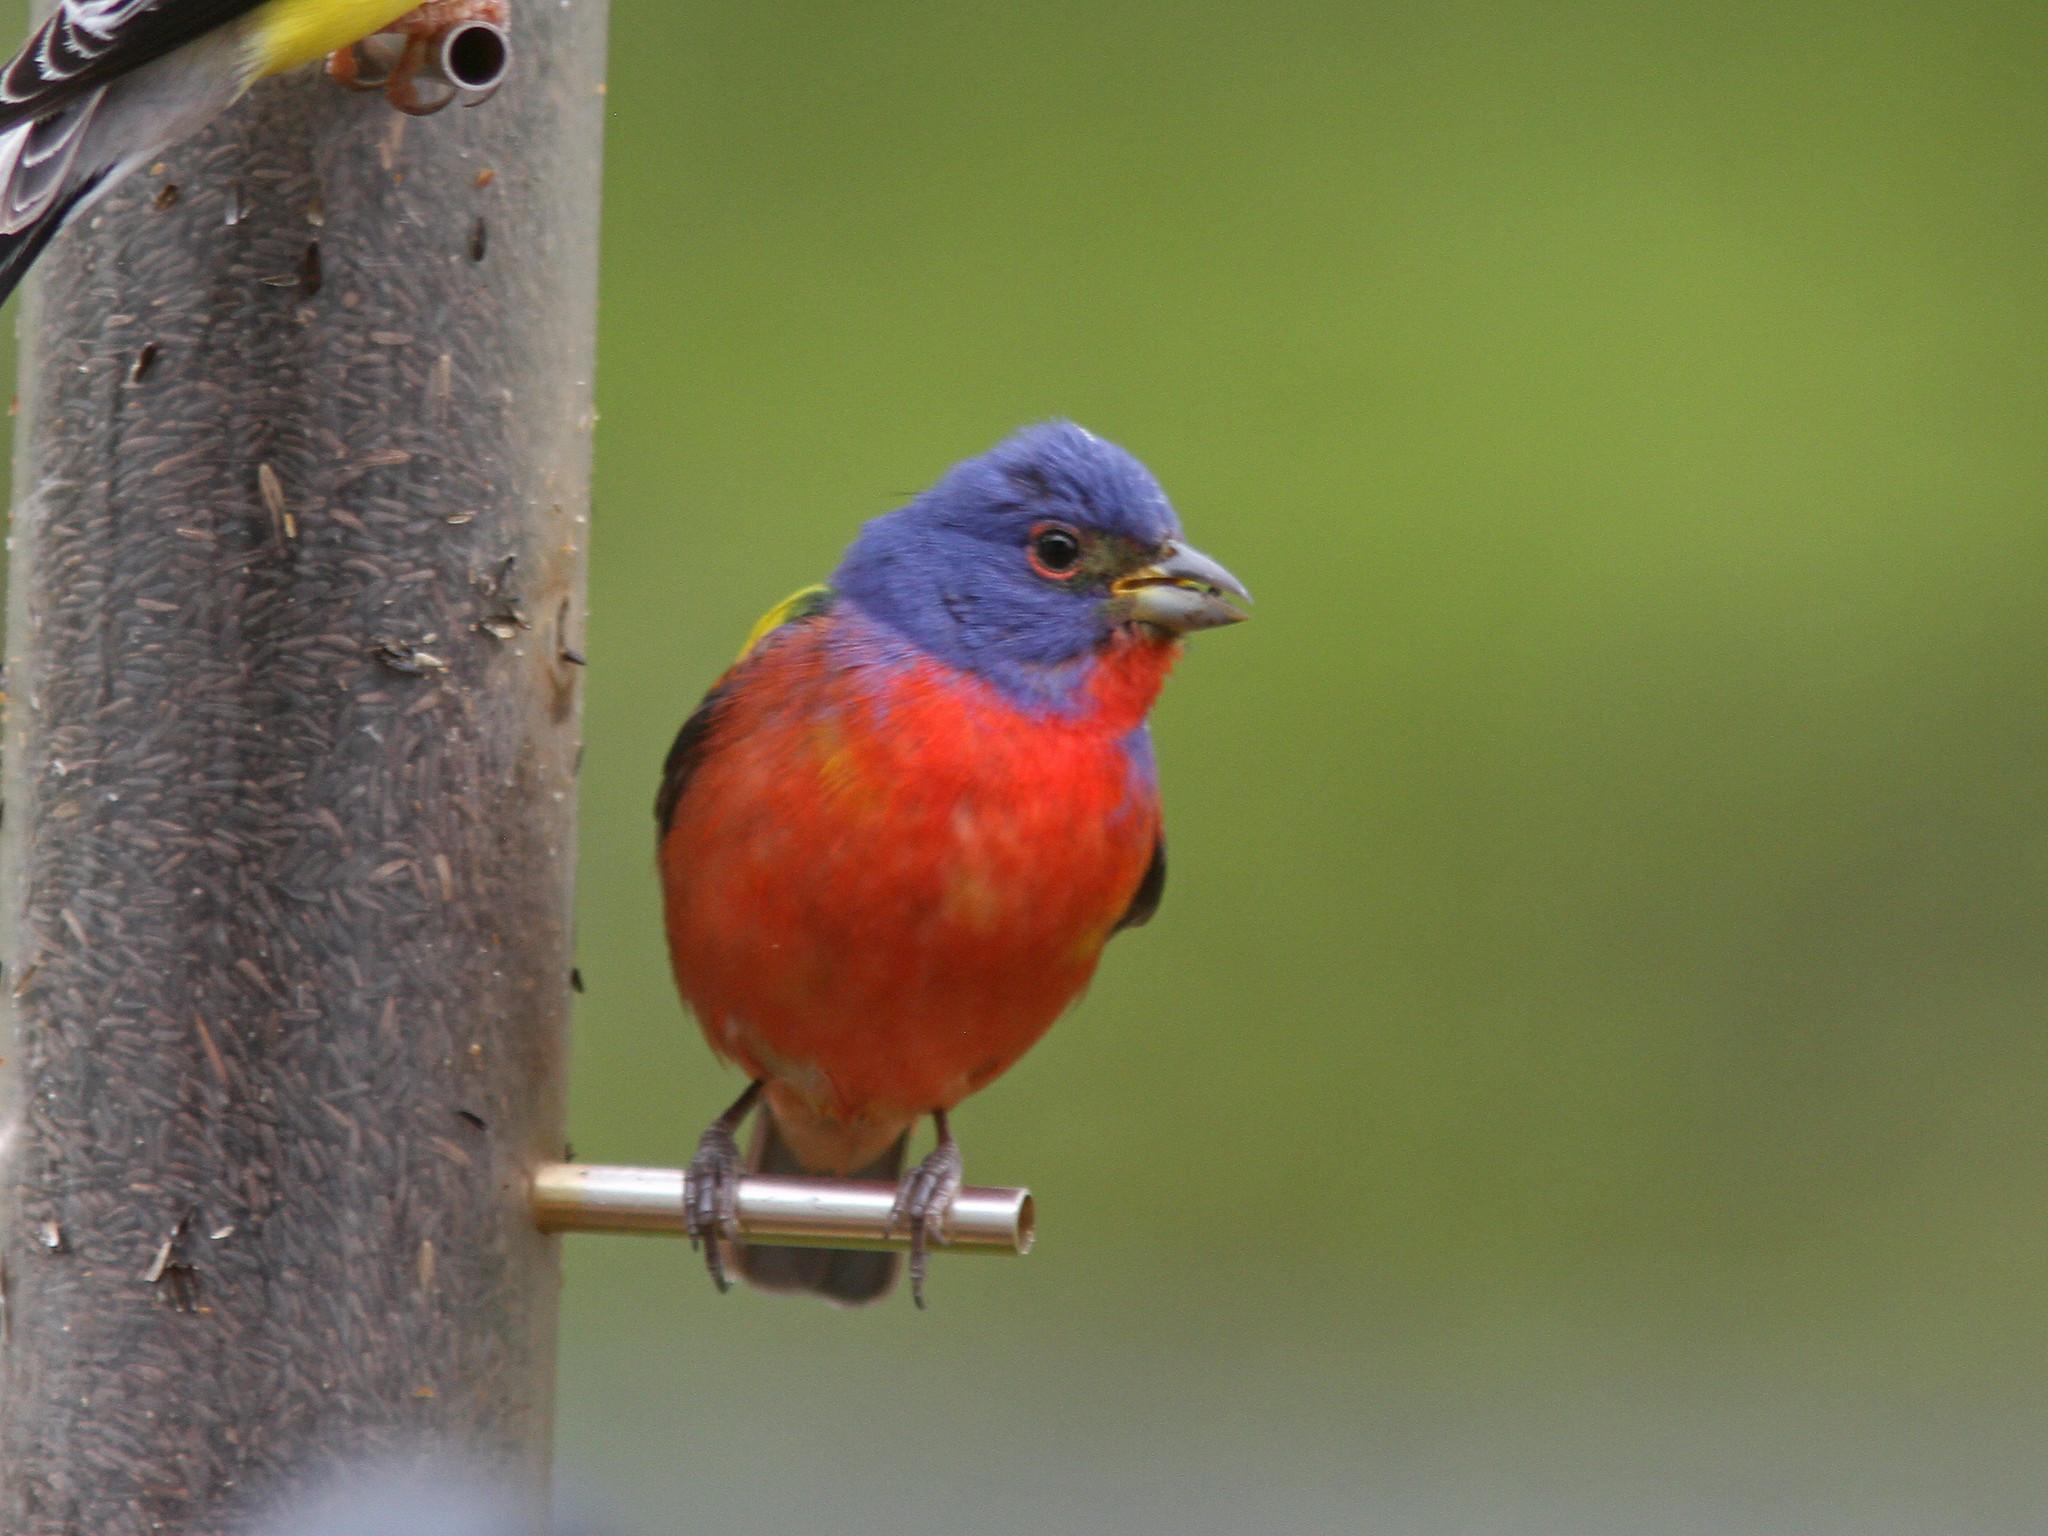 Quabbin birding and beyond: PAINTED BUNTING in Hampshire